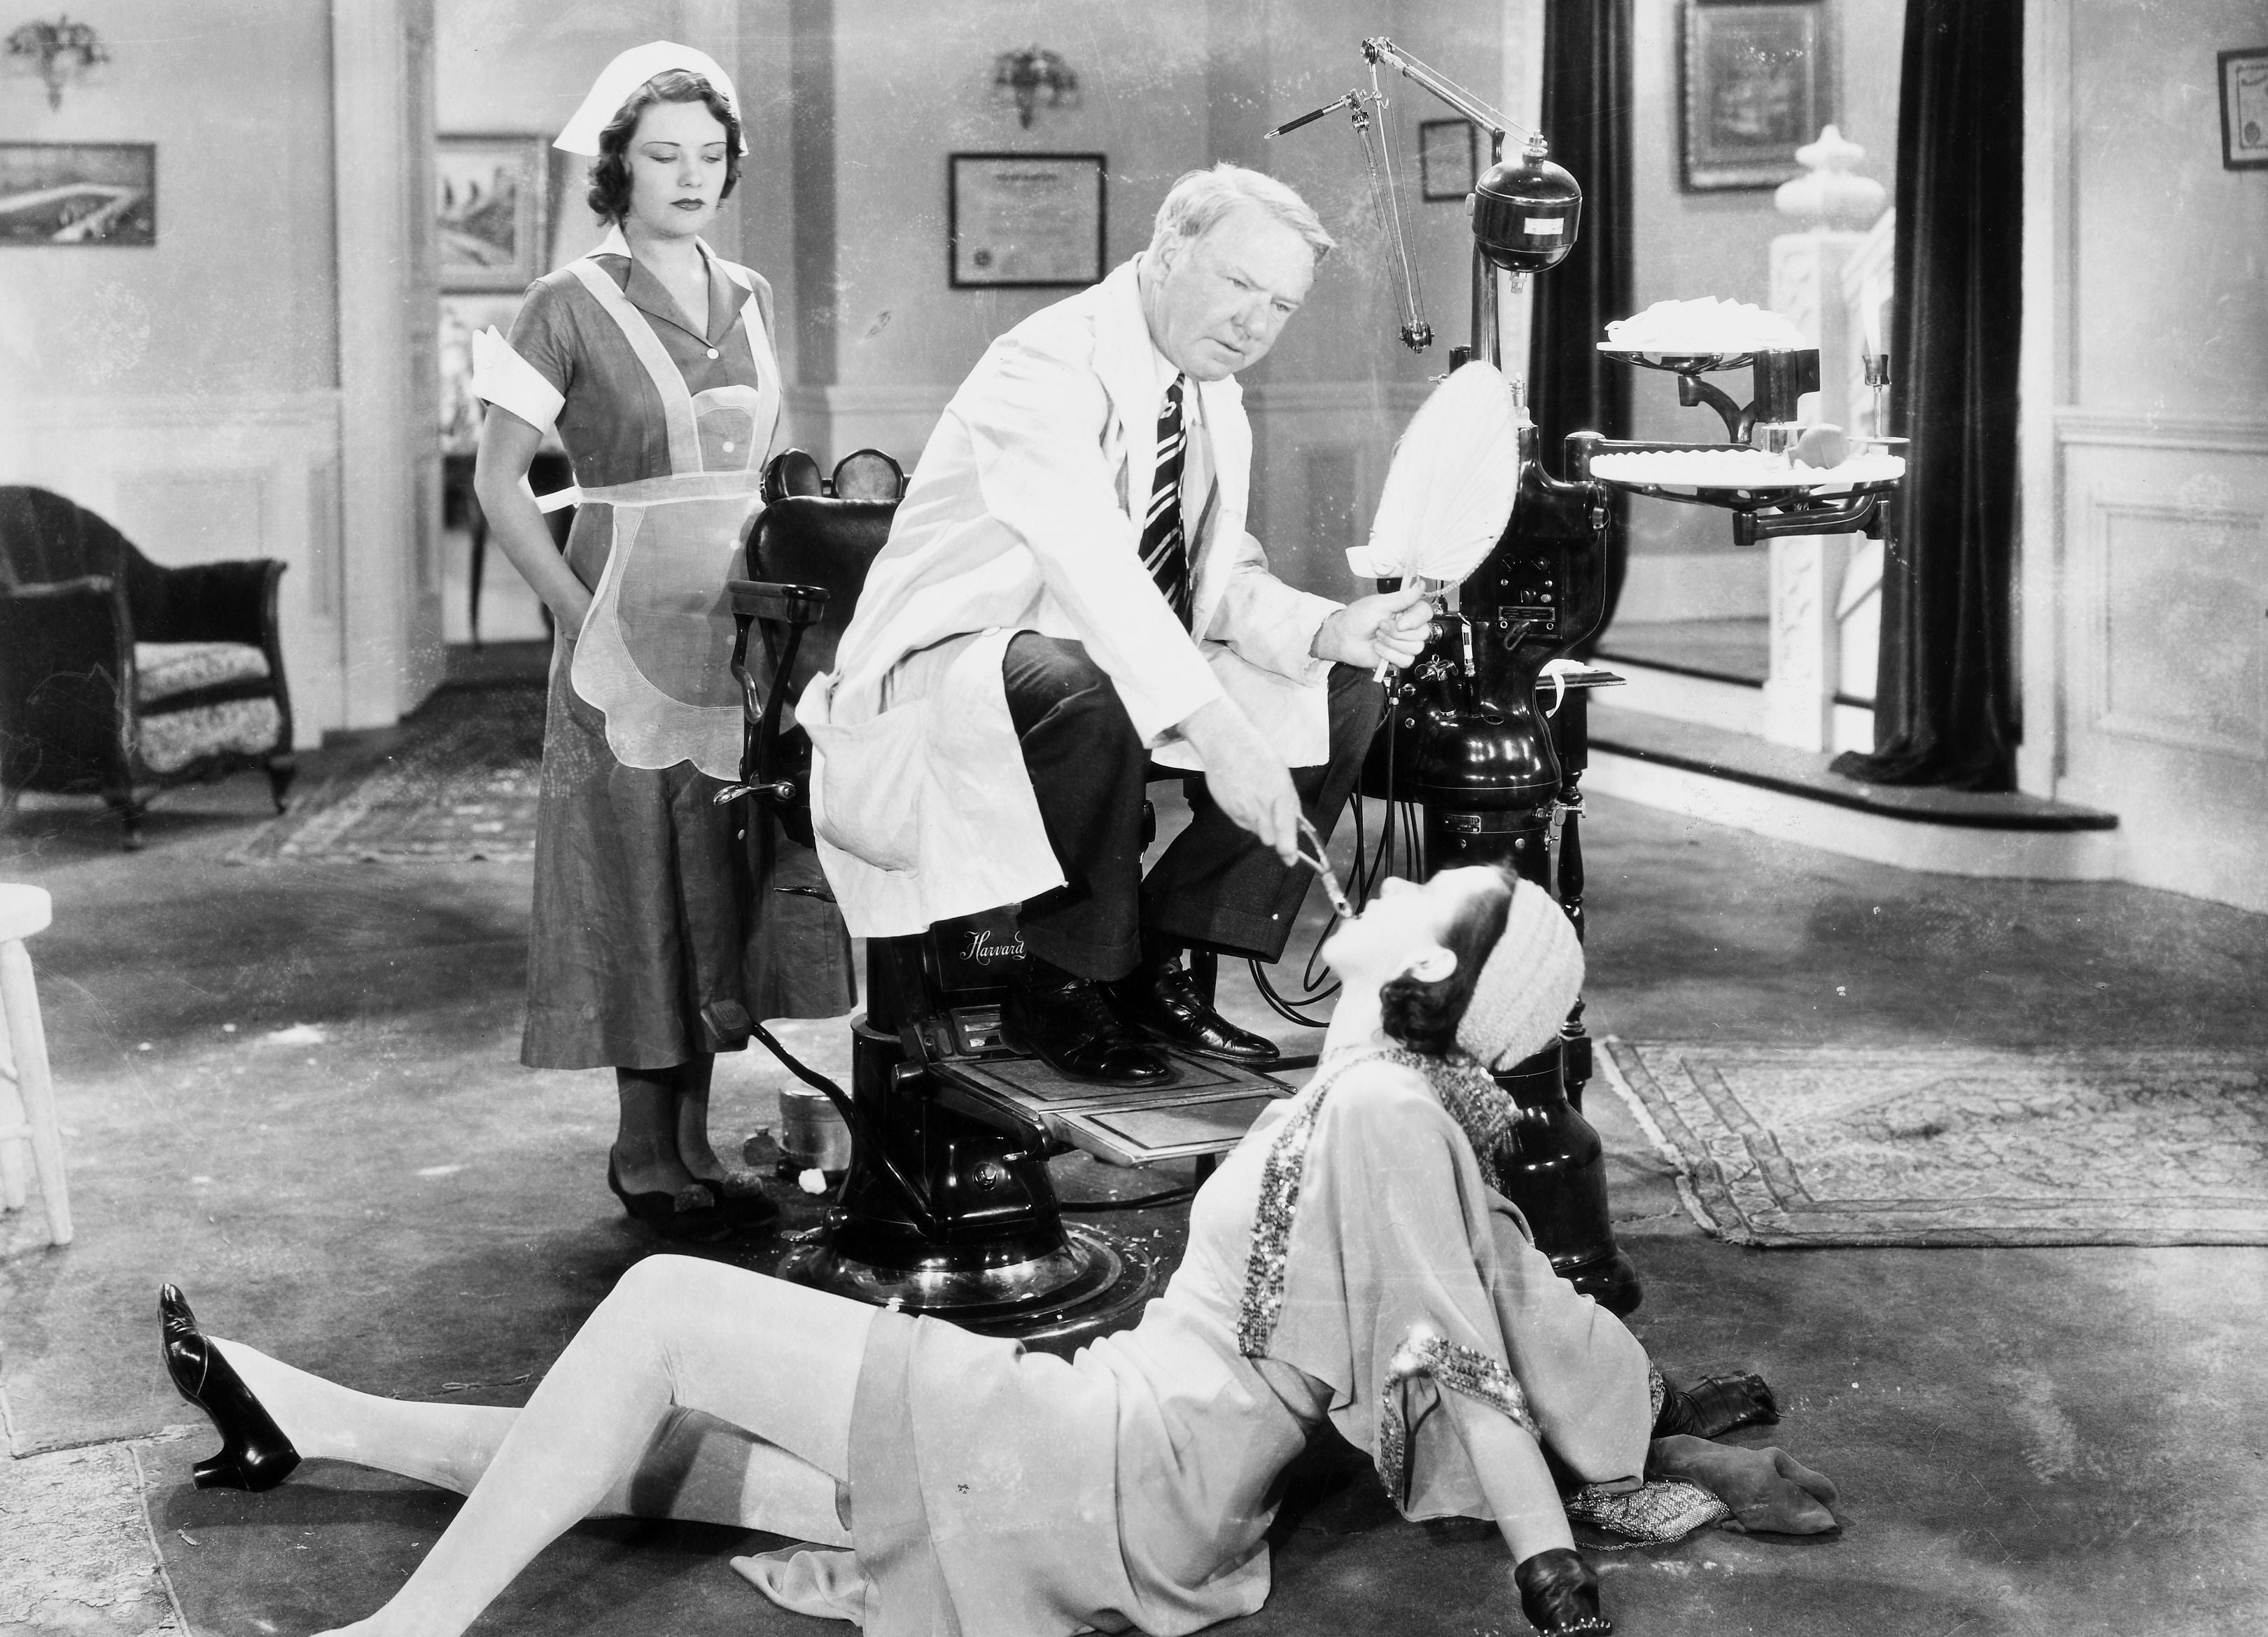 WC Fields, who starred in films such as ‘The Dentist’ (1932), was a virtuoso in screen grumpiness – and you rarely saw him trying to ingratiate himself by showing a more tender side